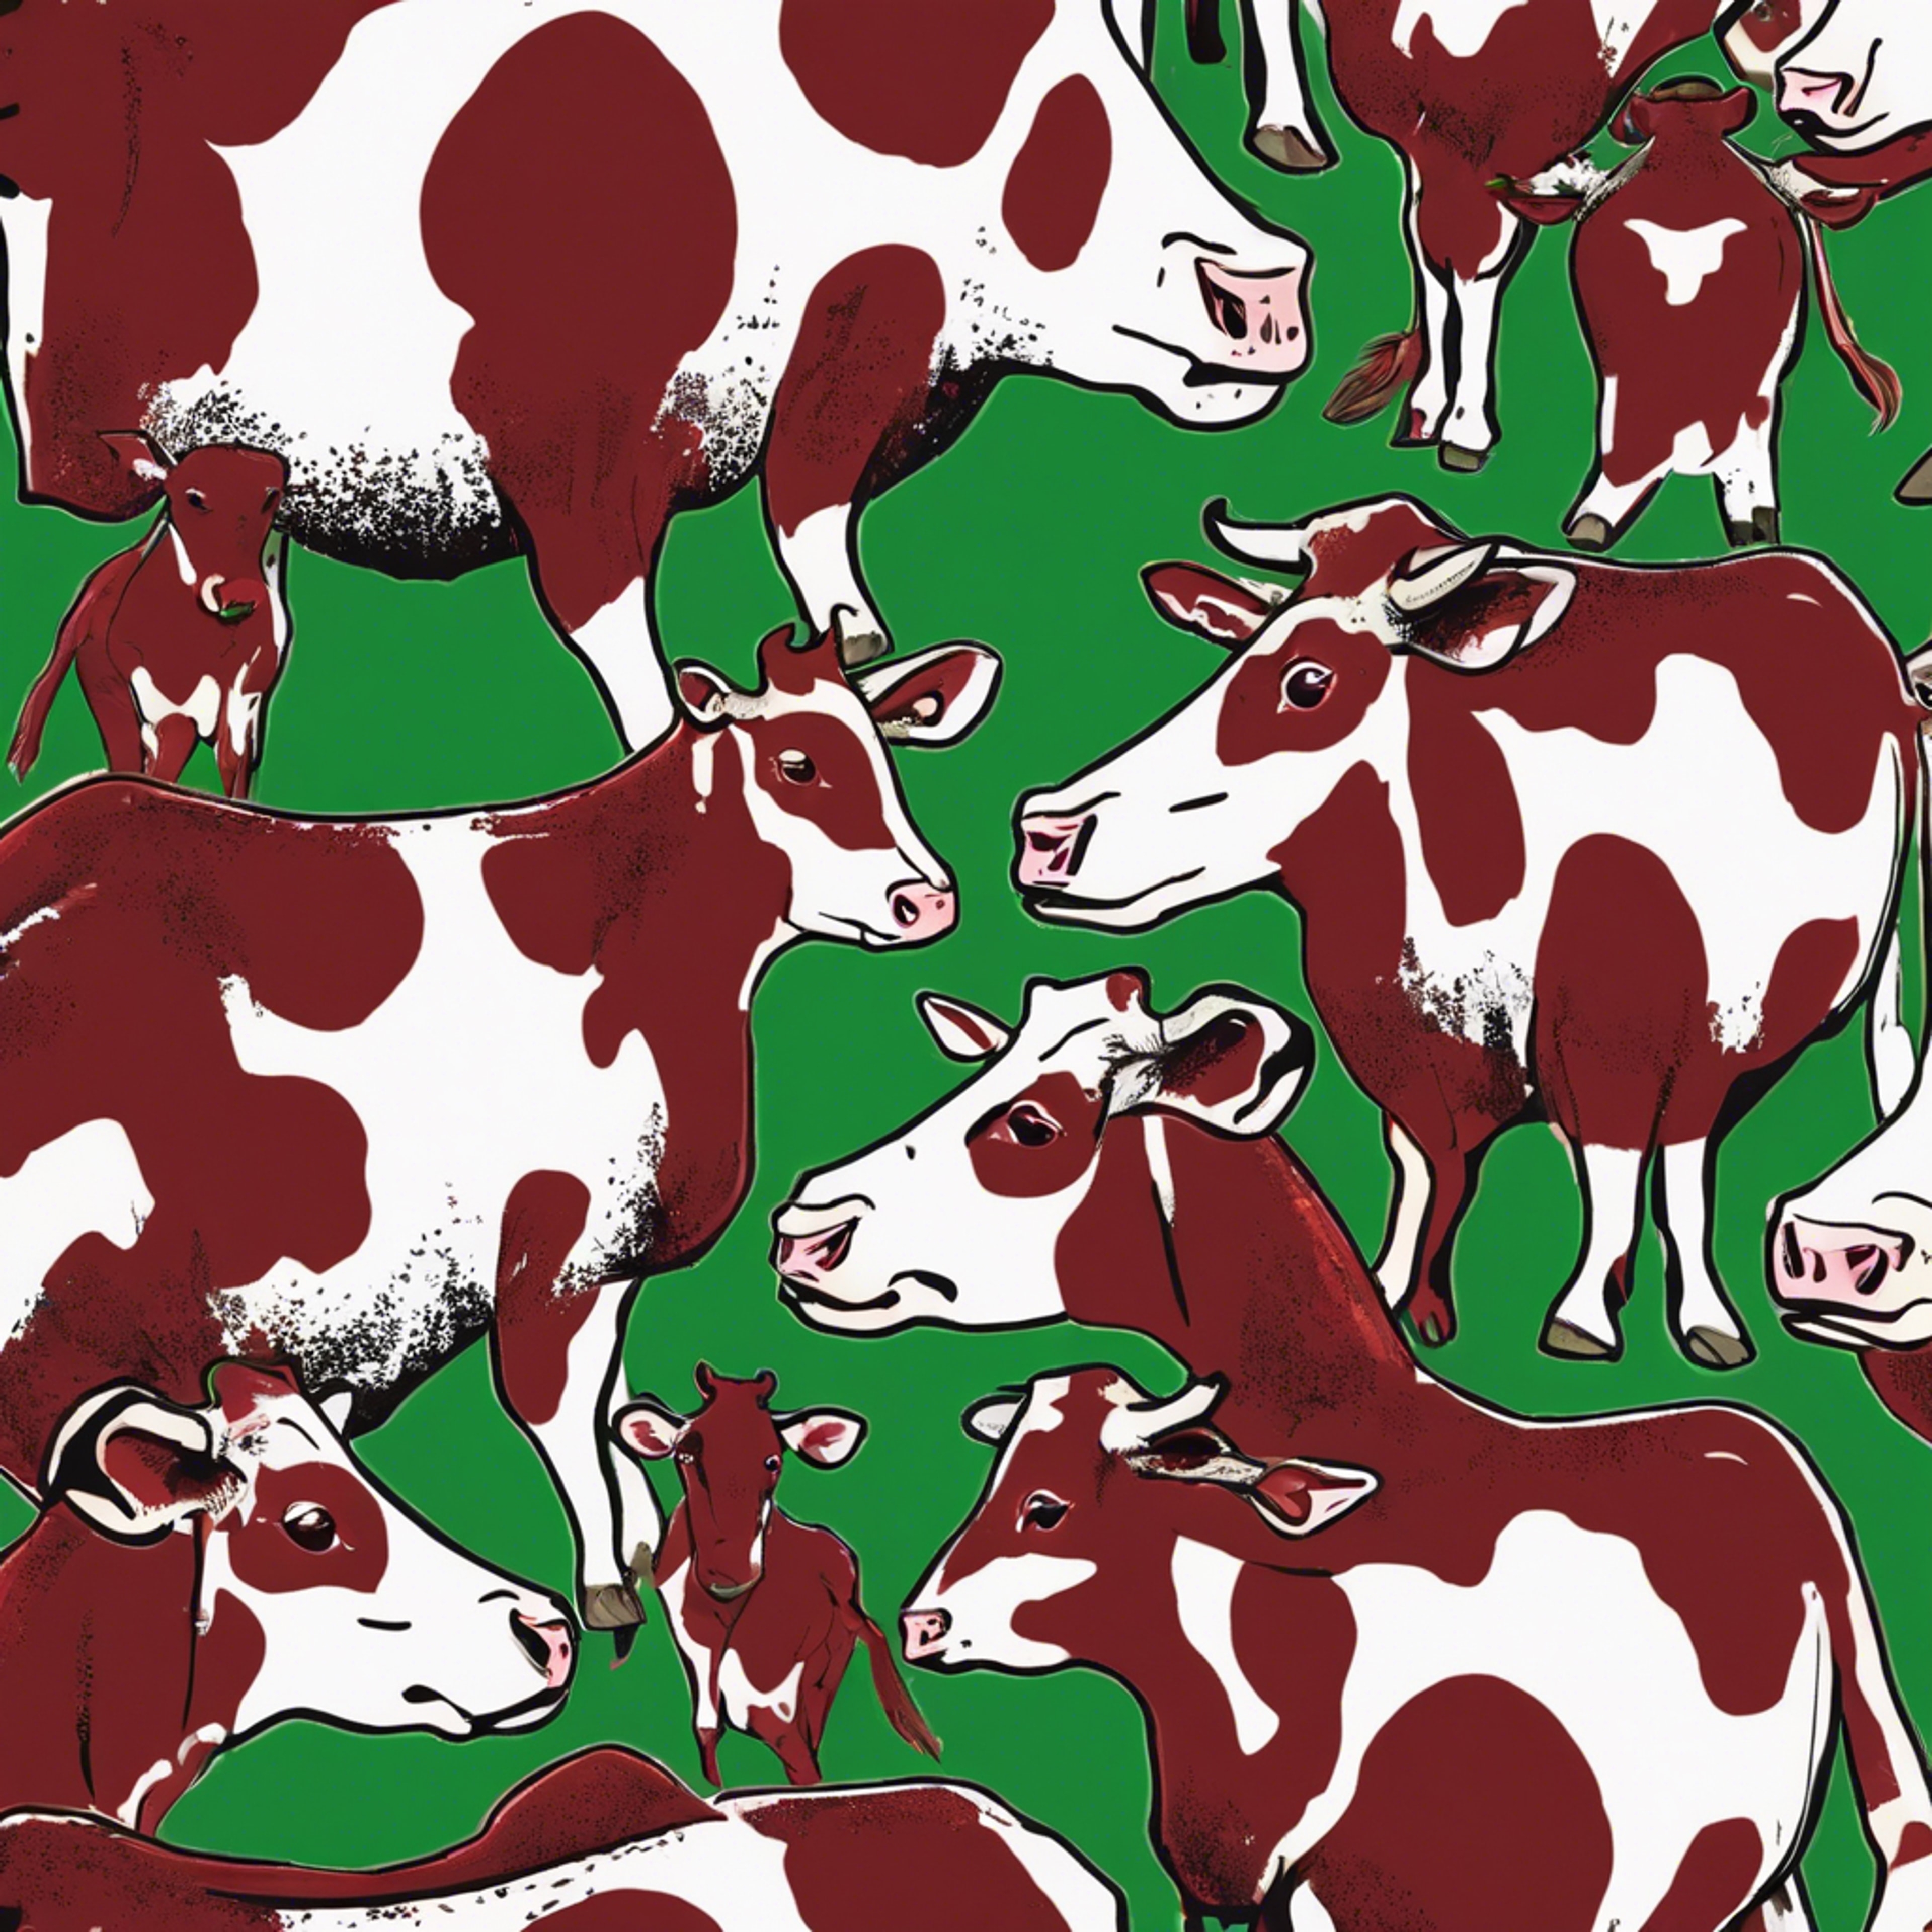 Cow spots in a mixed arrangement of rich red and fresh green. Tapeta[f1cd1f055c9d420f9ac5]